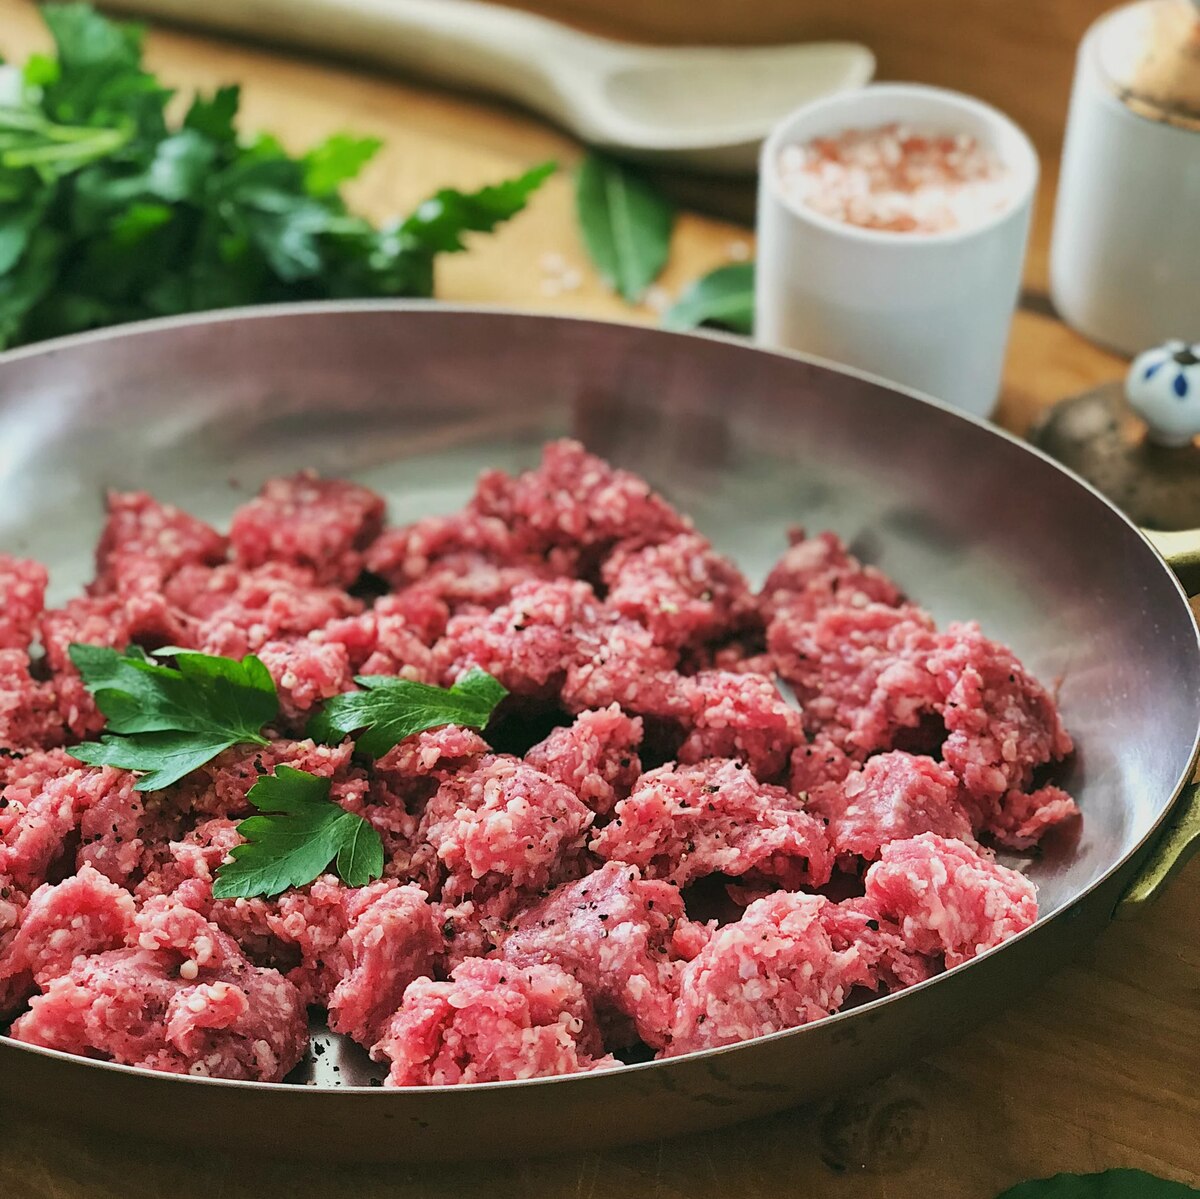 How To Cook Grass-Fed Ground Beef